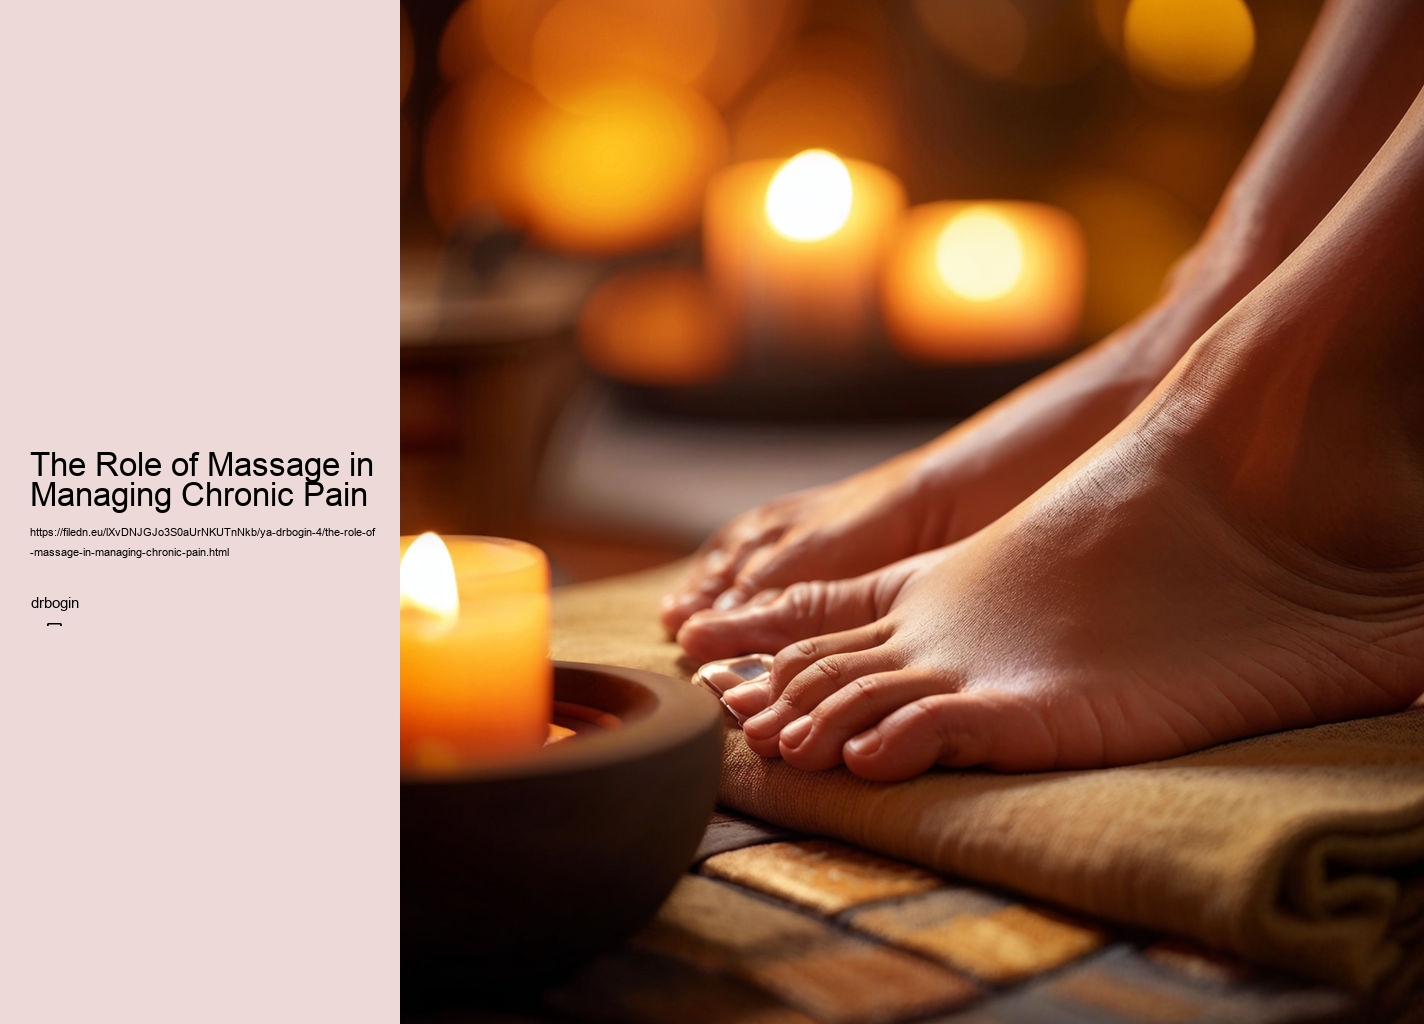 The Role of Massage in Managing Chronic Pain